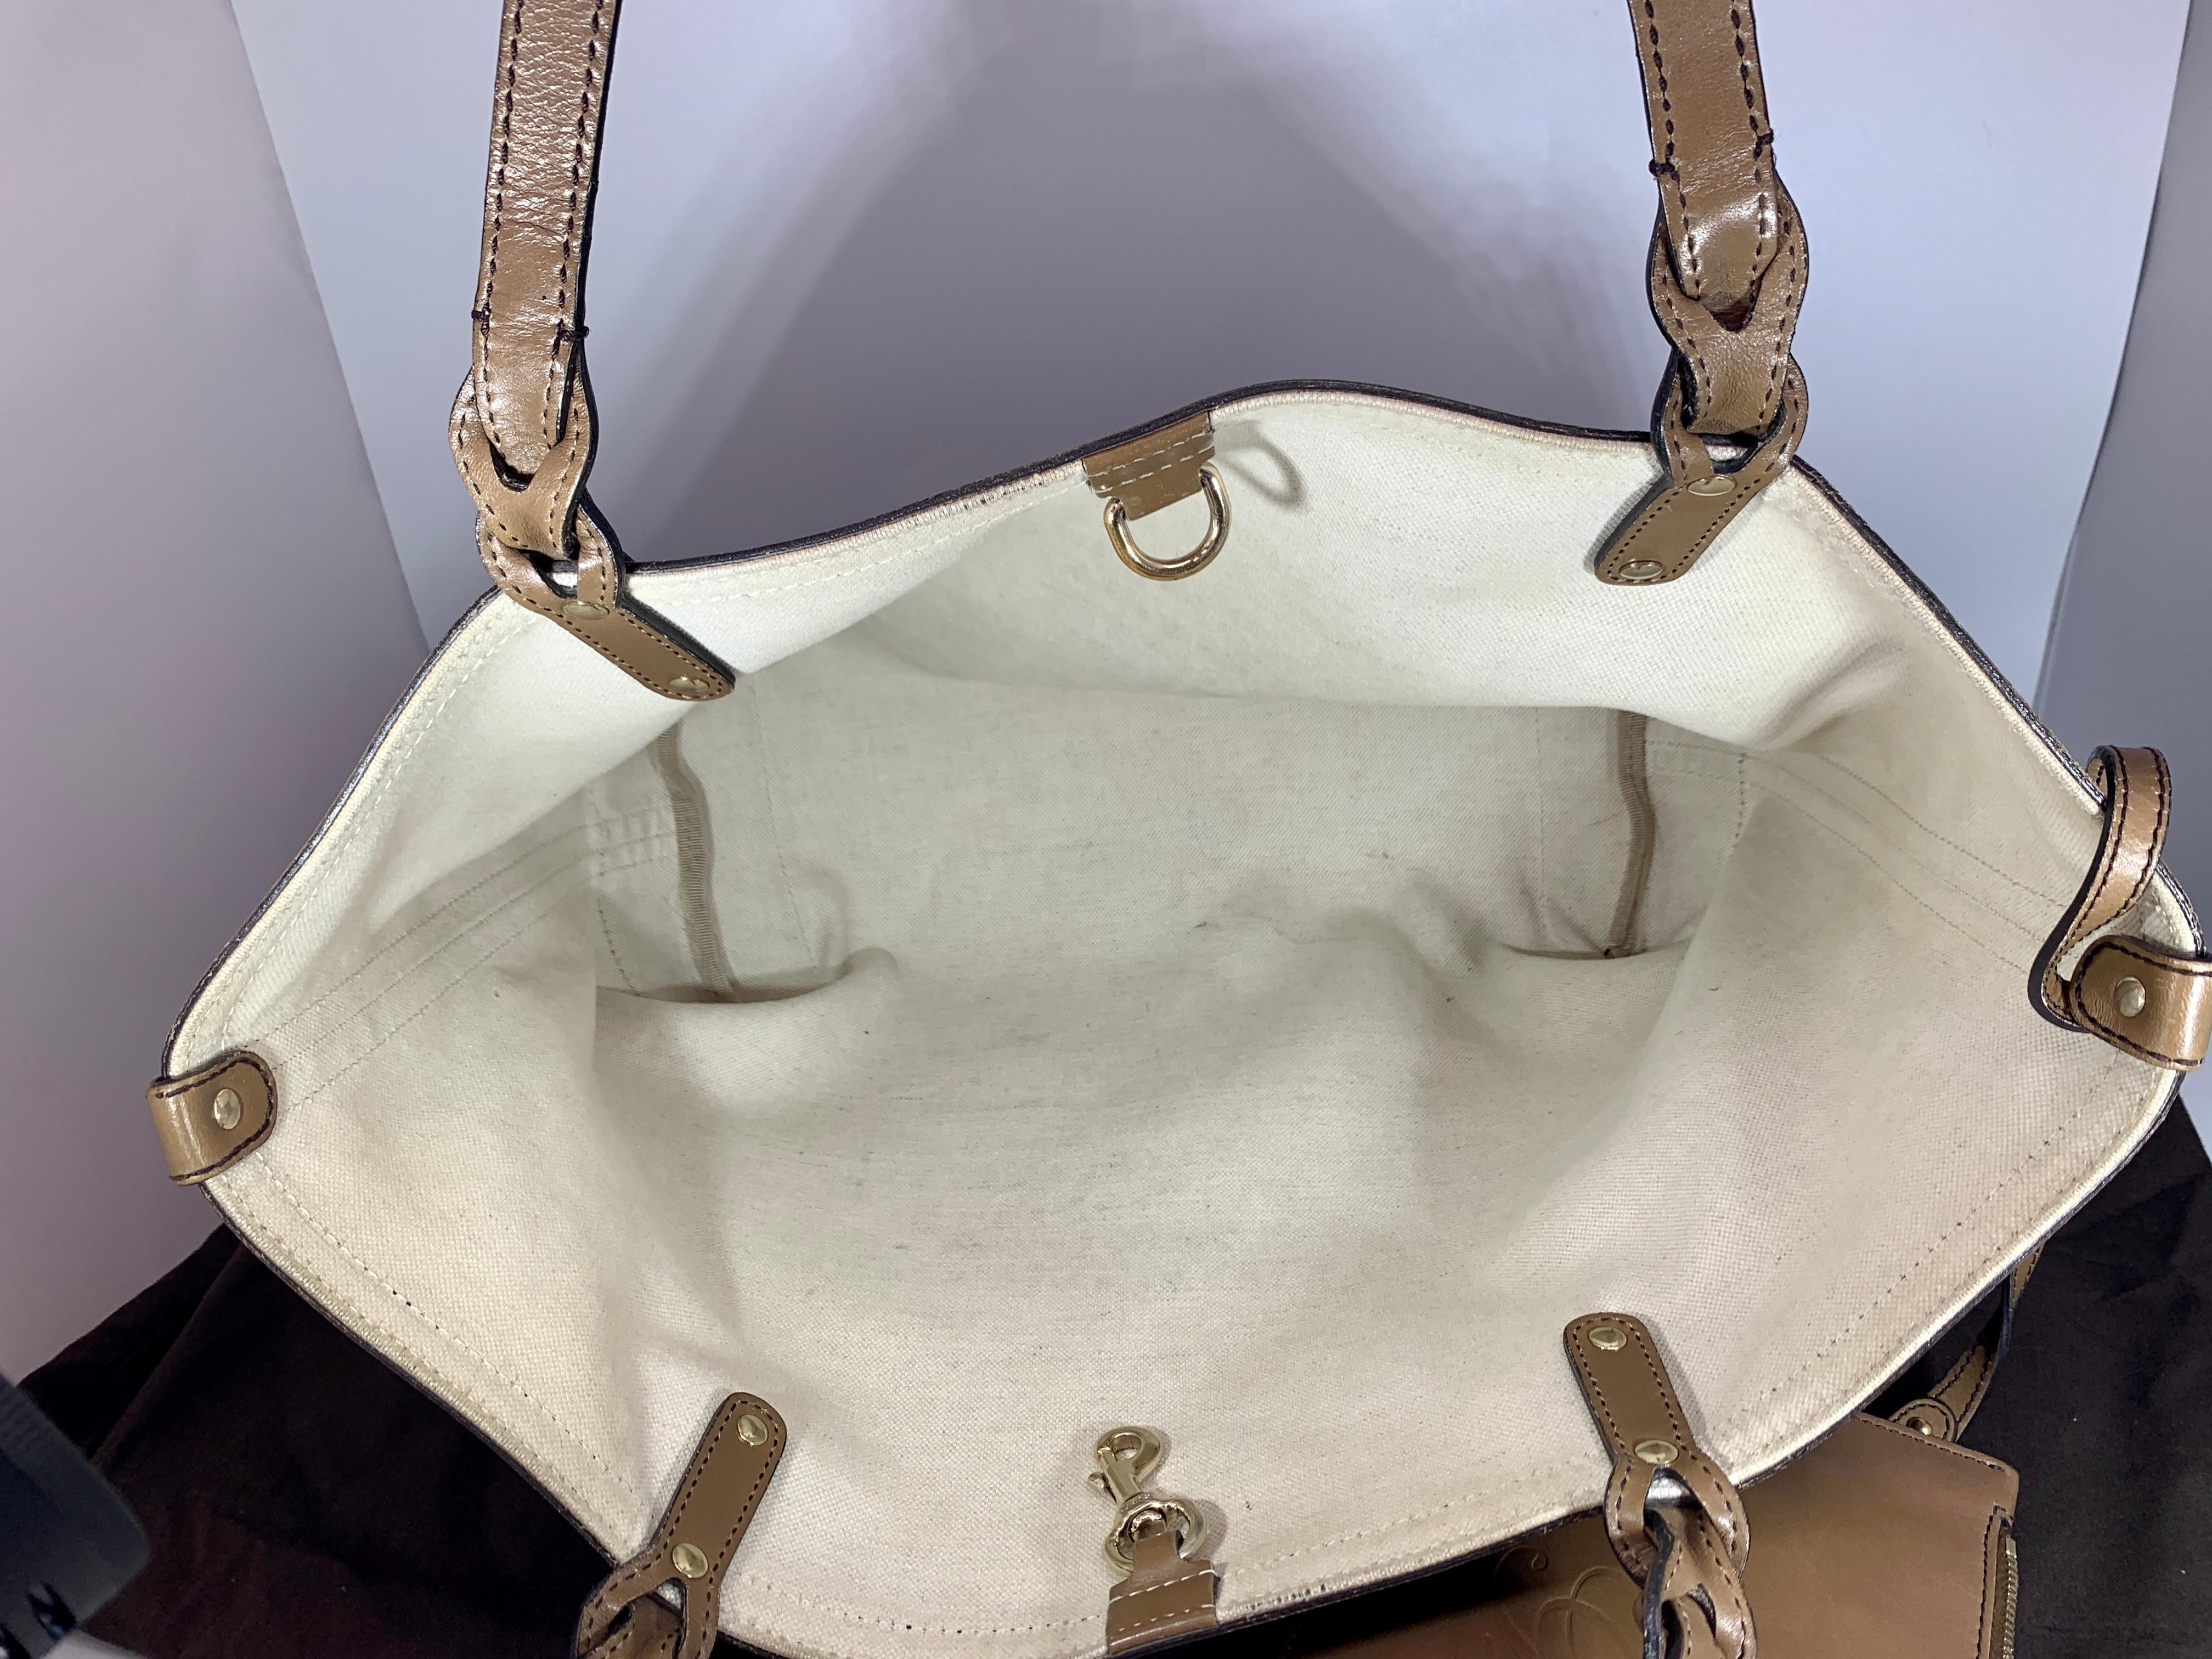 GUCCI Monogram Large Original Tote Tan With Pouch, Like Neverfull